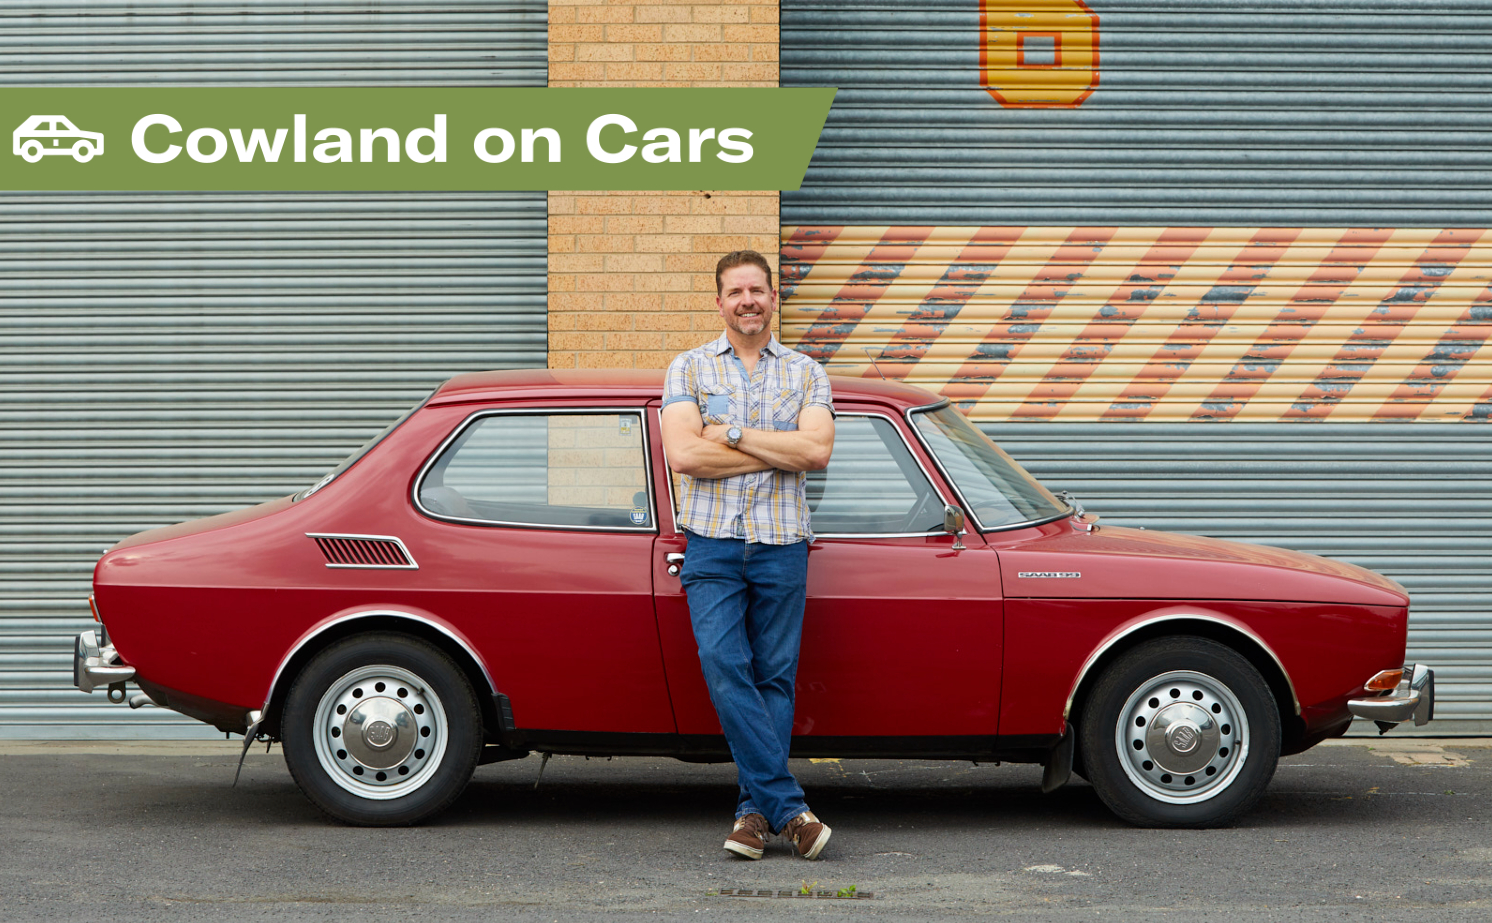 Paul Cowland’s Top 10 Tips for Buying a Classic Car